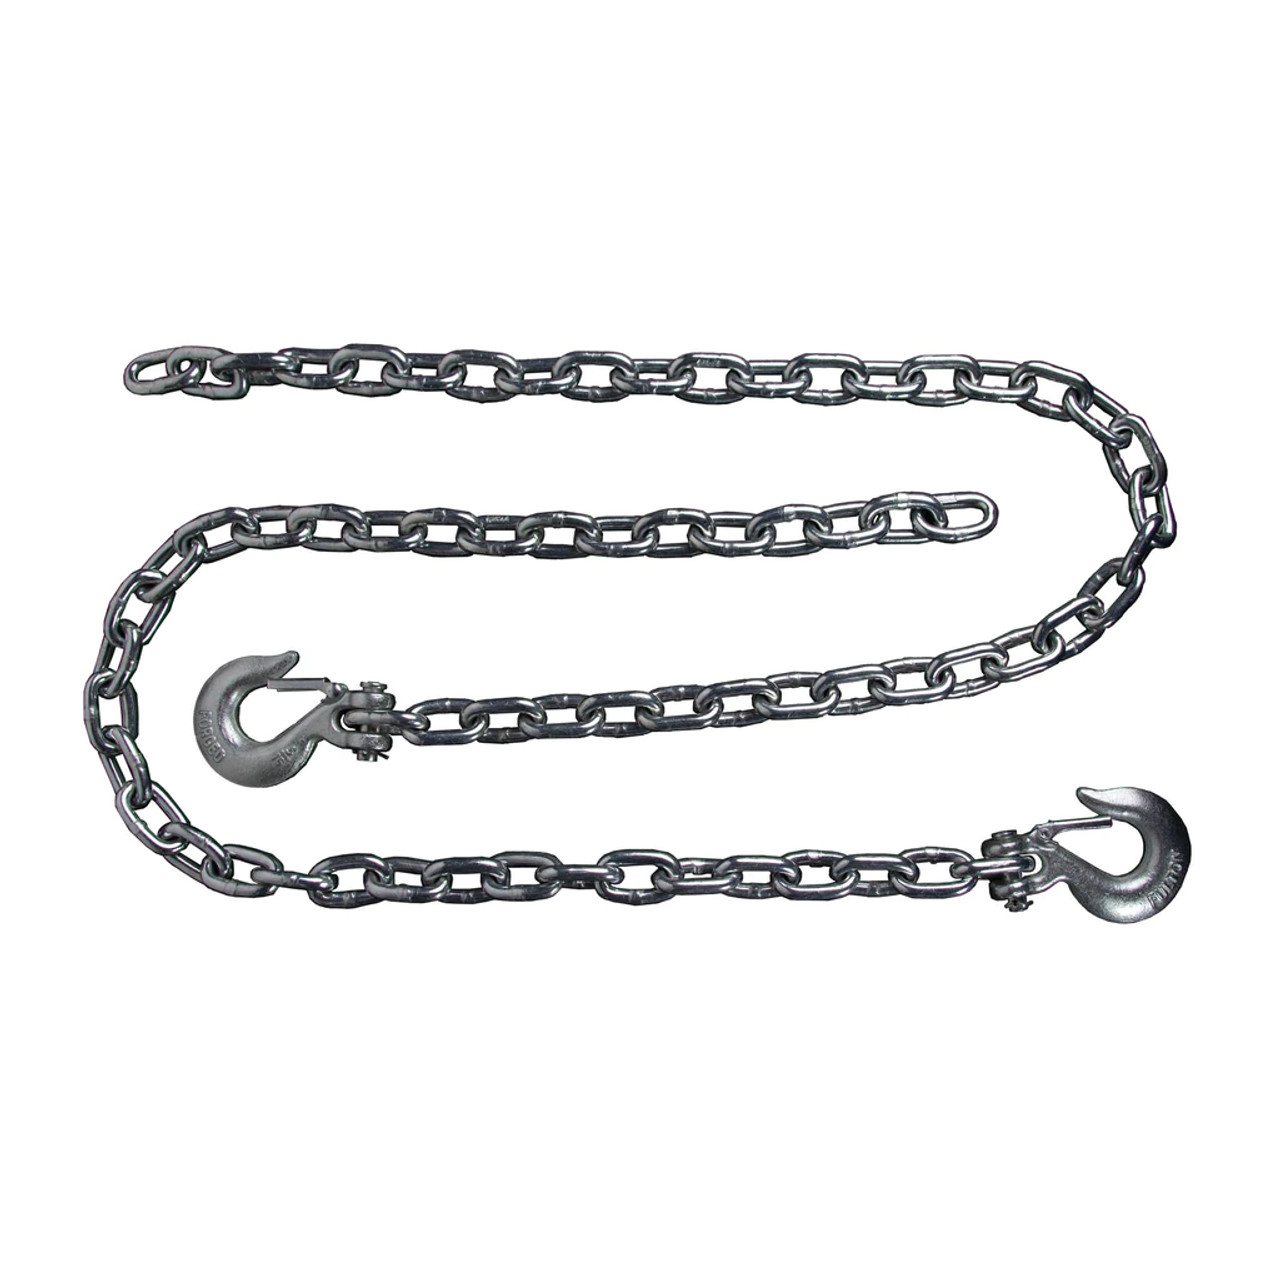 BulletProof Safety Chains - Heavy Duty